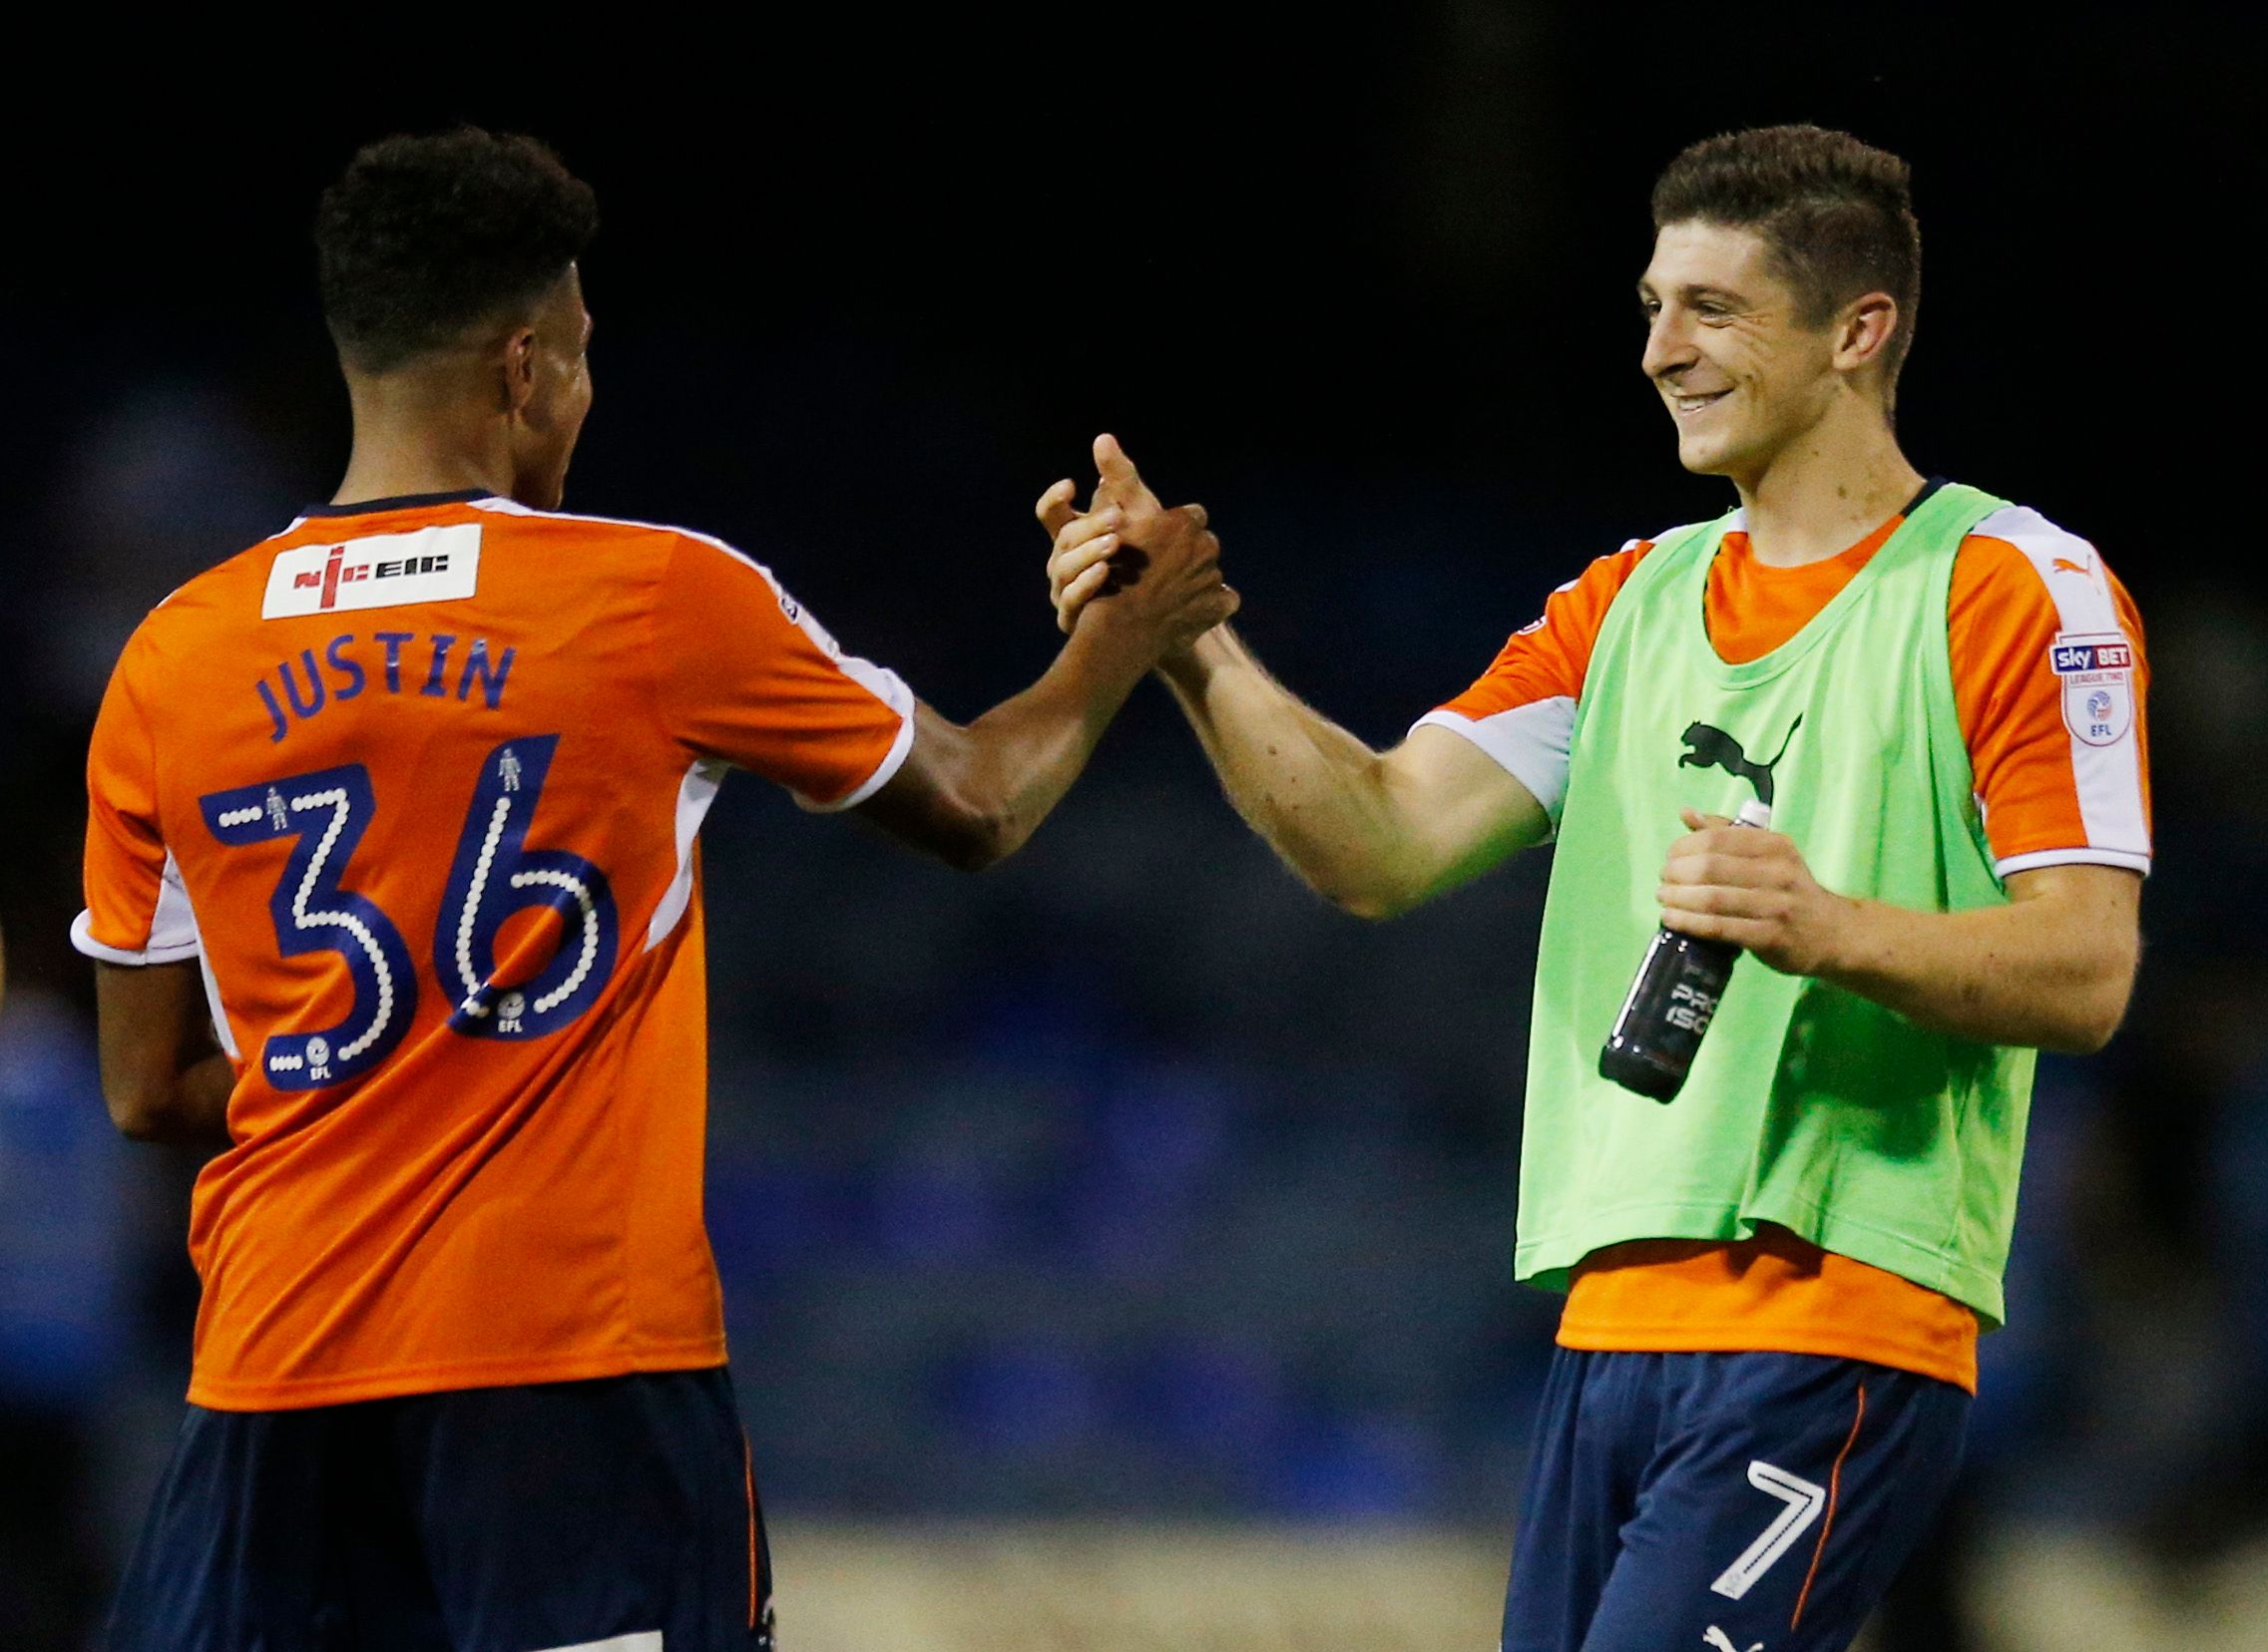 Britain Football Soccer - Luton Town v Aston Villa - EFL Cup First Round - Kenilworth Road - 10/8/16
Luton Town's Jake Gray and James Justin celebrate at the end of the match
Mandatory Credit: Action Images / Andrew Couldridge
Livepic